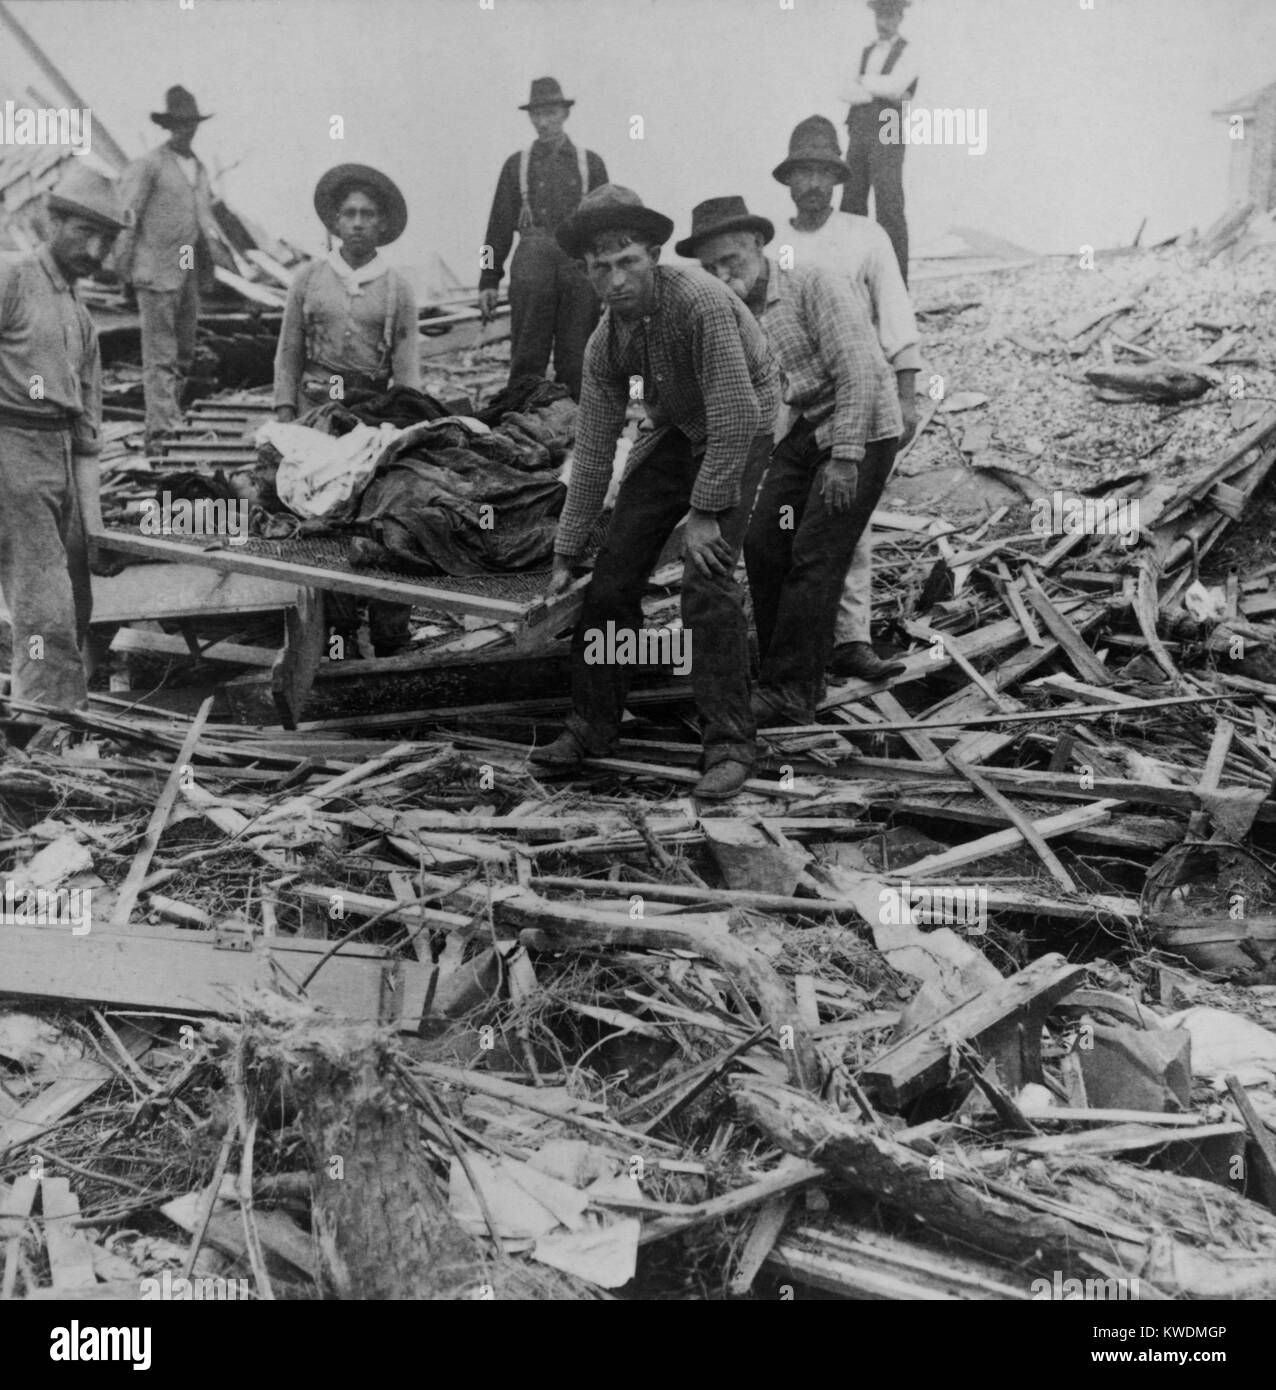 Men carrying bodies on stretcher, surrounded by wreckage of the hurricane in Galveston, Texas, Sept. 1900. The disaster occurred on Sept. 8th, but relief efforts took two days to get underway and took weeks (BSLOC 2017 17 85) Stock Photo